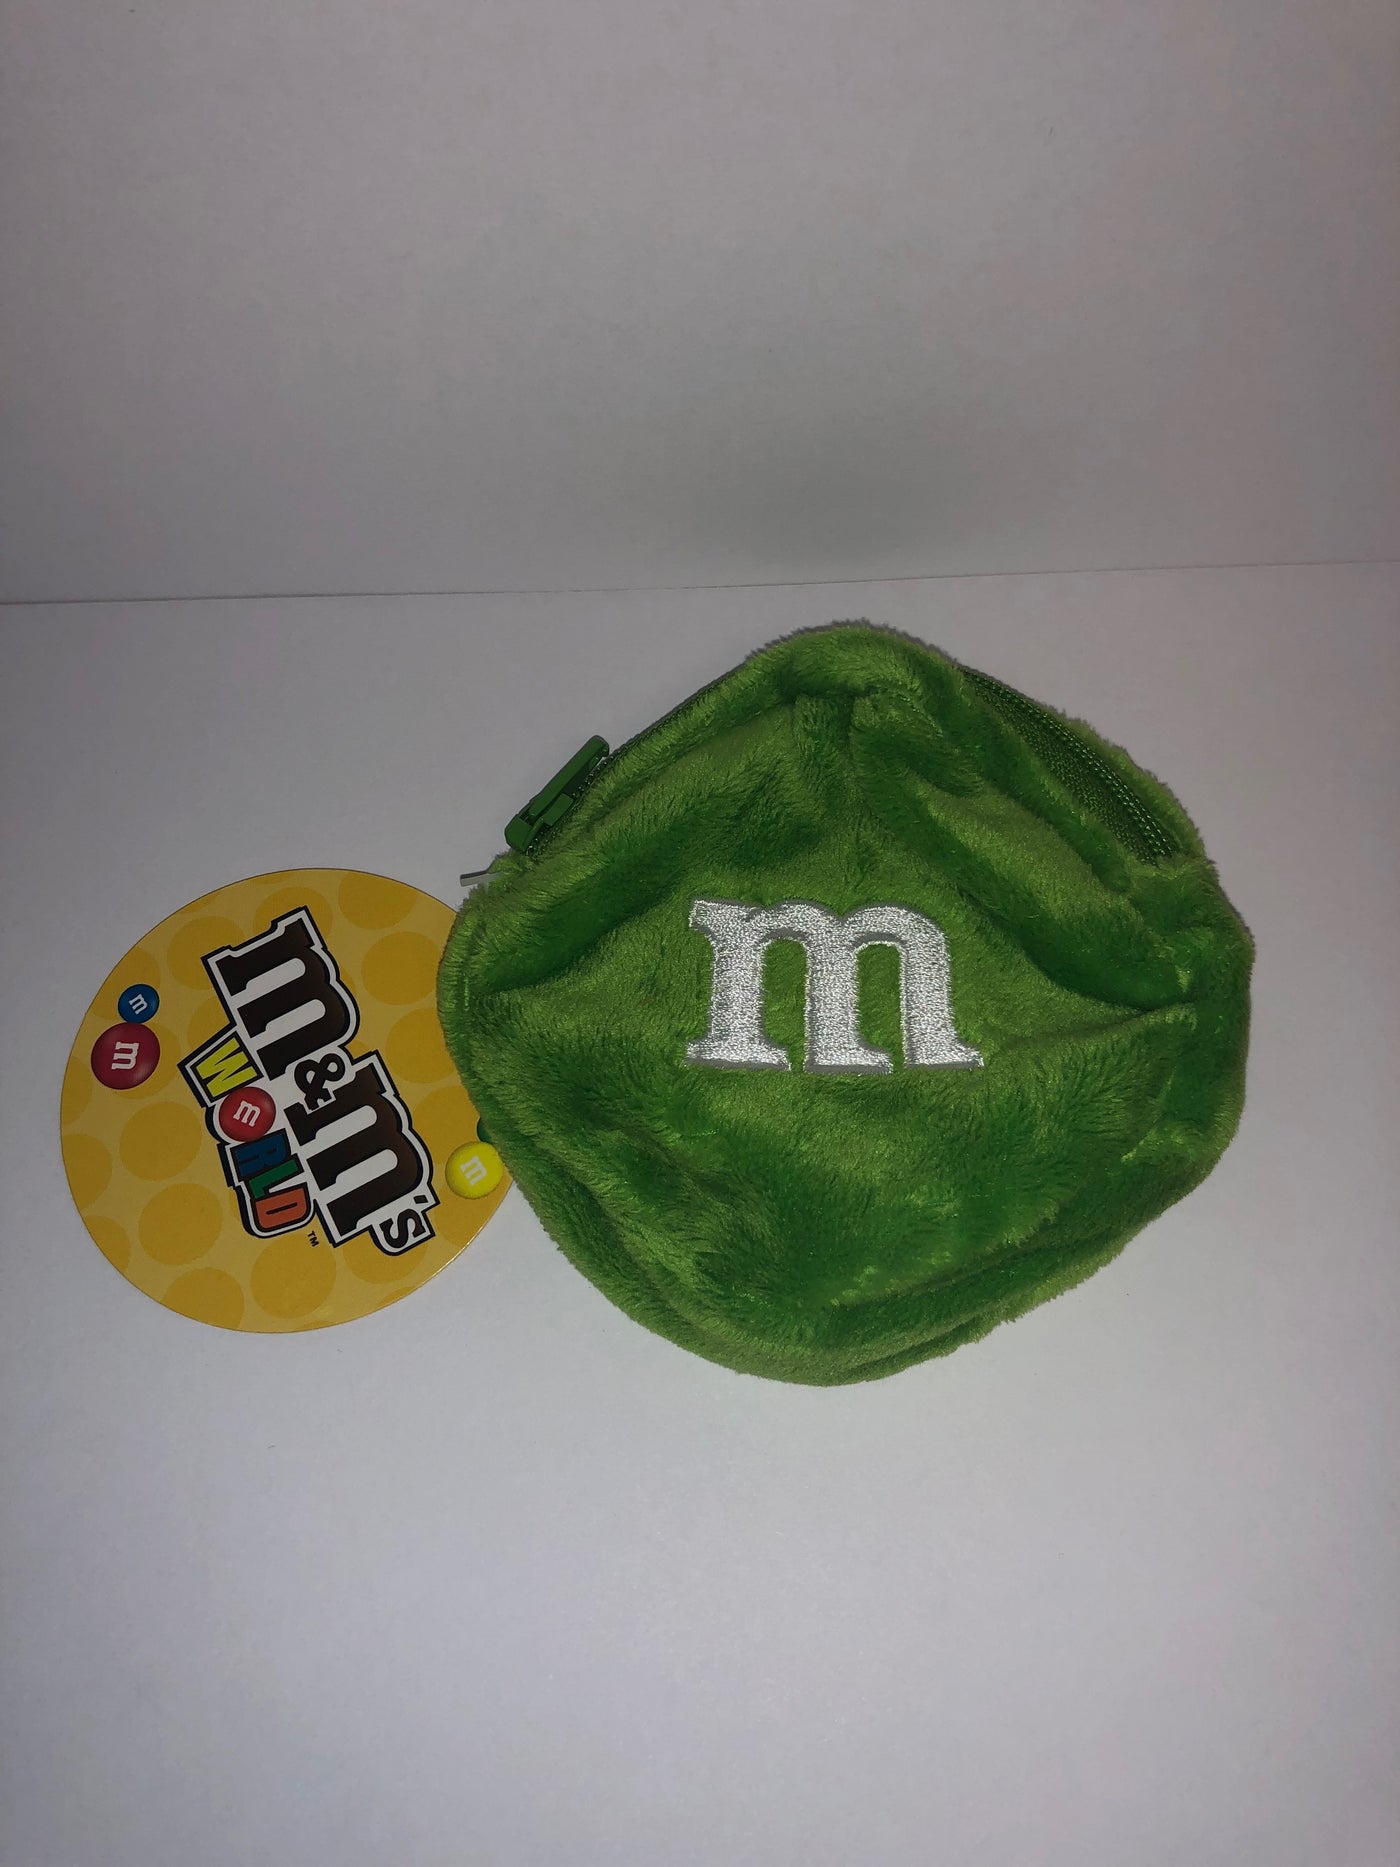 M&M's World Green Character Coin Purse Plush New with Tags